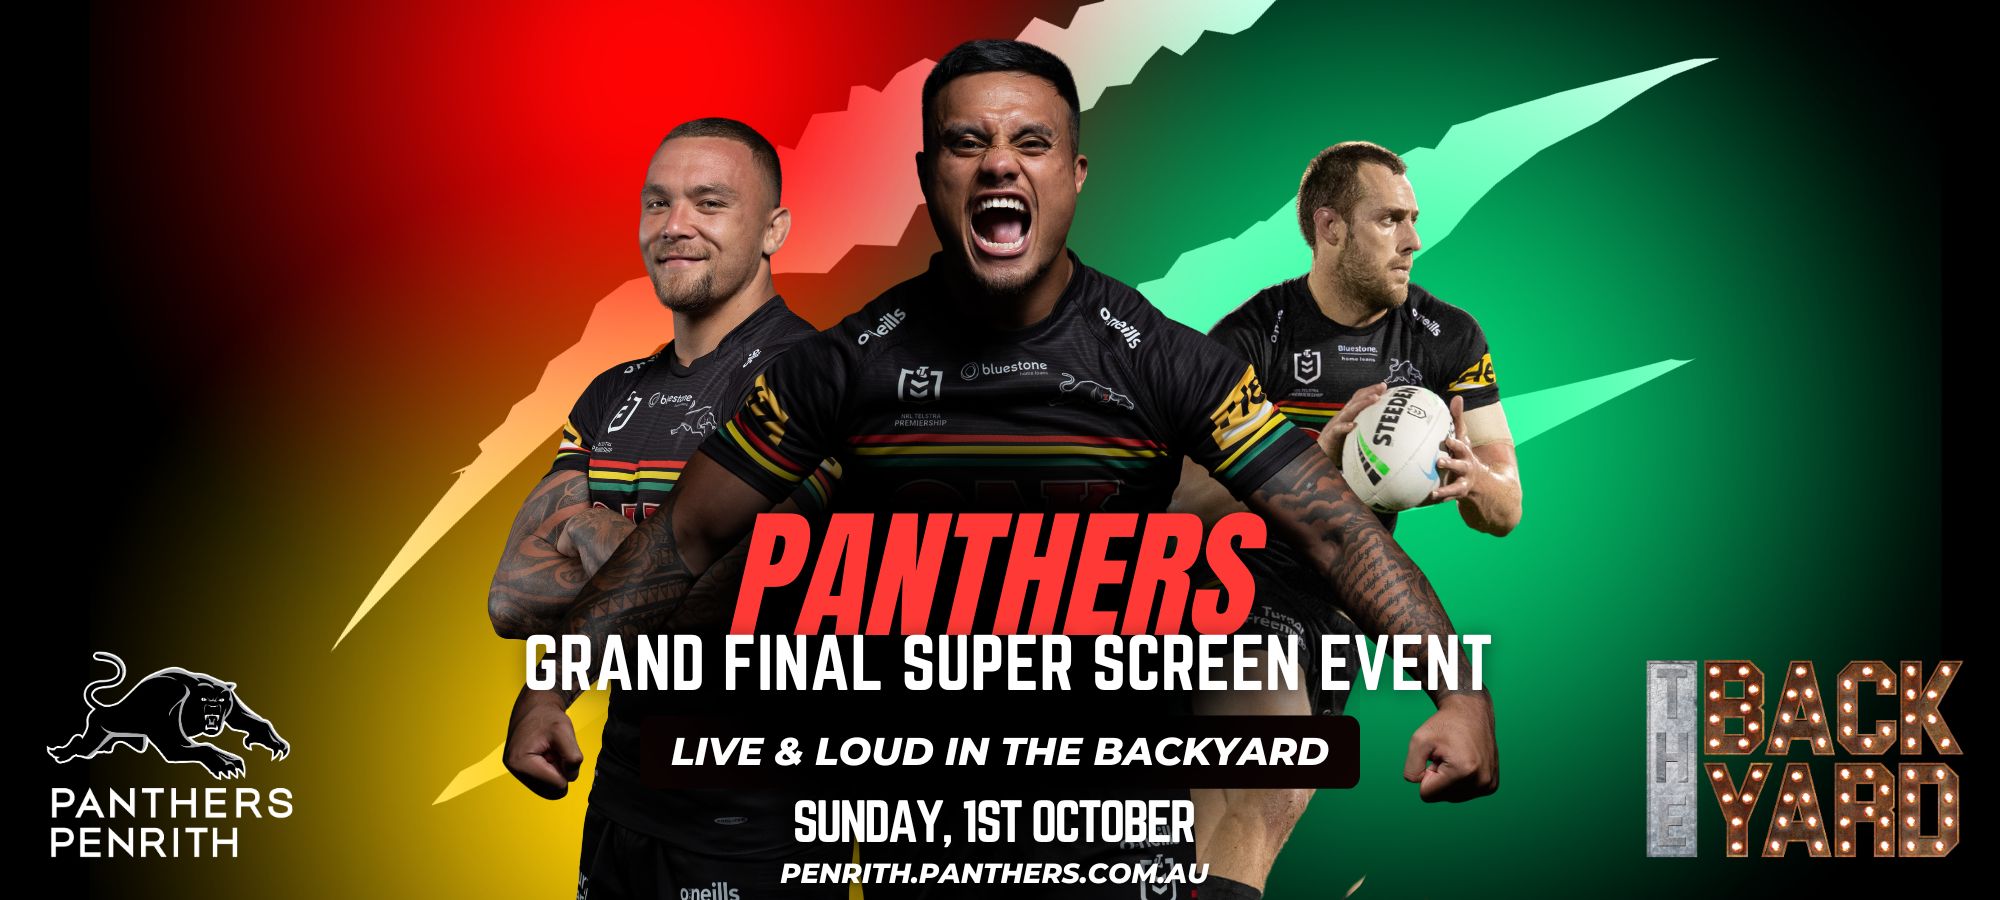 NRL GRAND FINAL - Panthers vs Broncos - Panthers Penrith